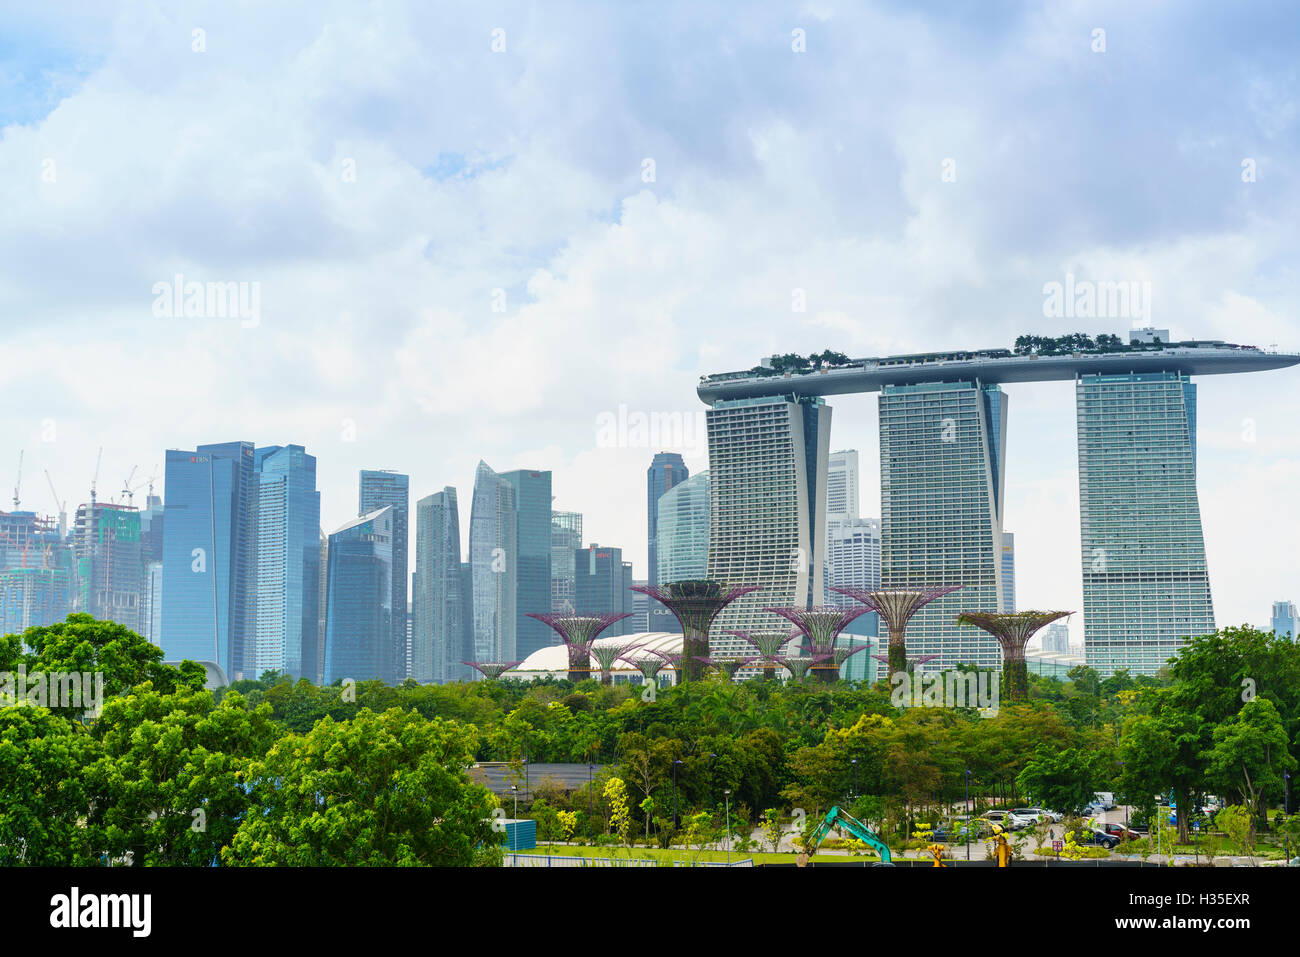 View over the Gardens by the Bay to the three towers of the Marina Bay Sands Hotel and city skyline beyond, Singapore Stock Photo